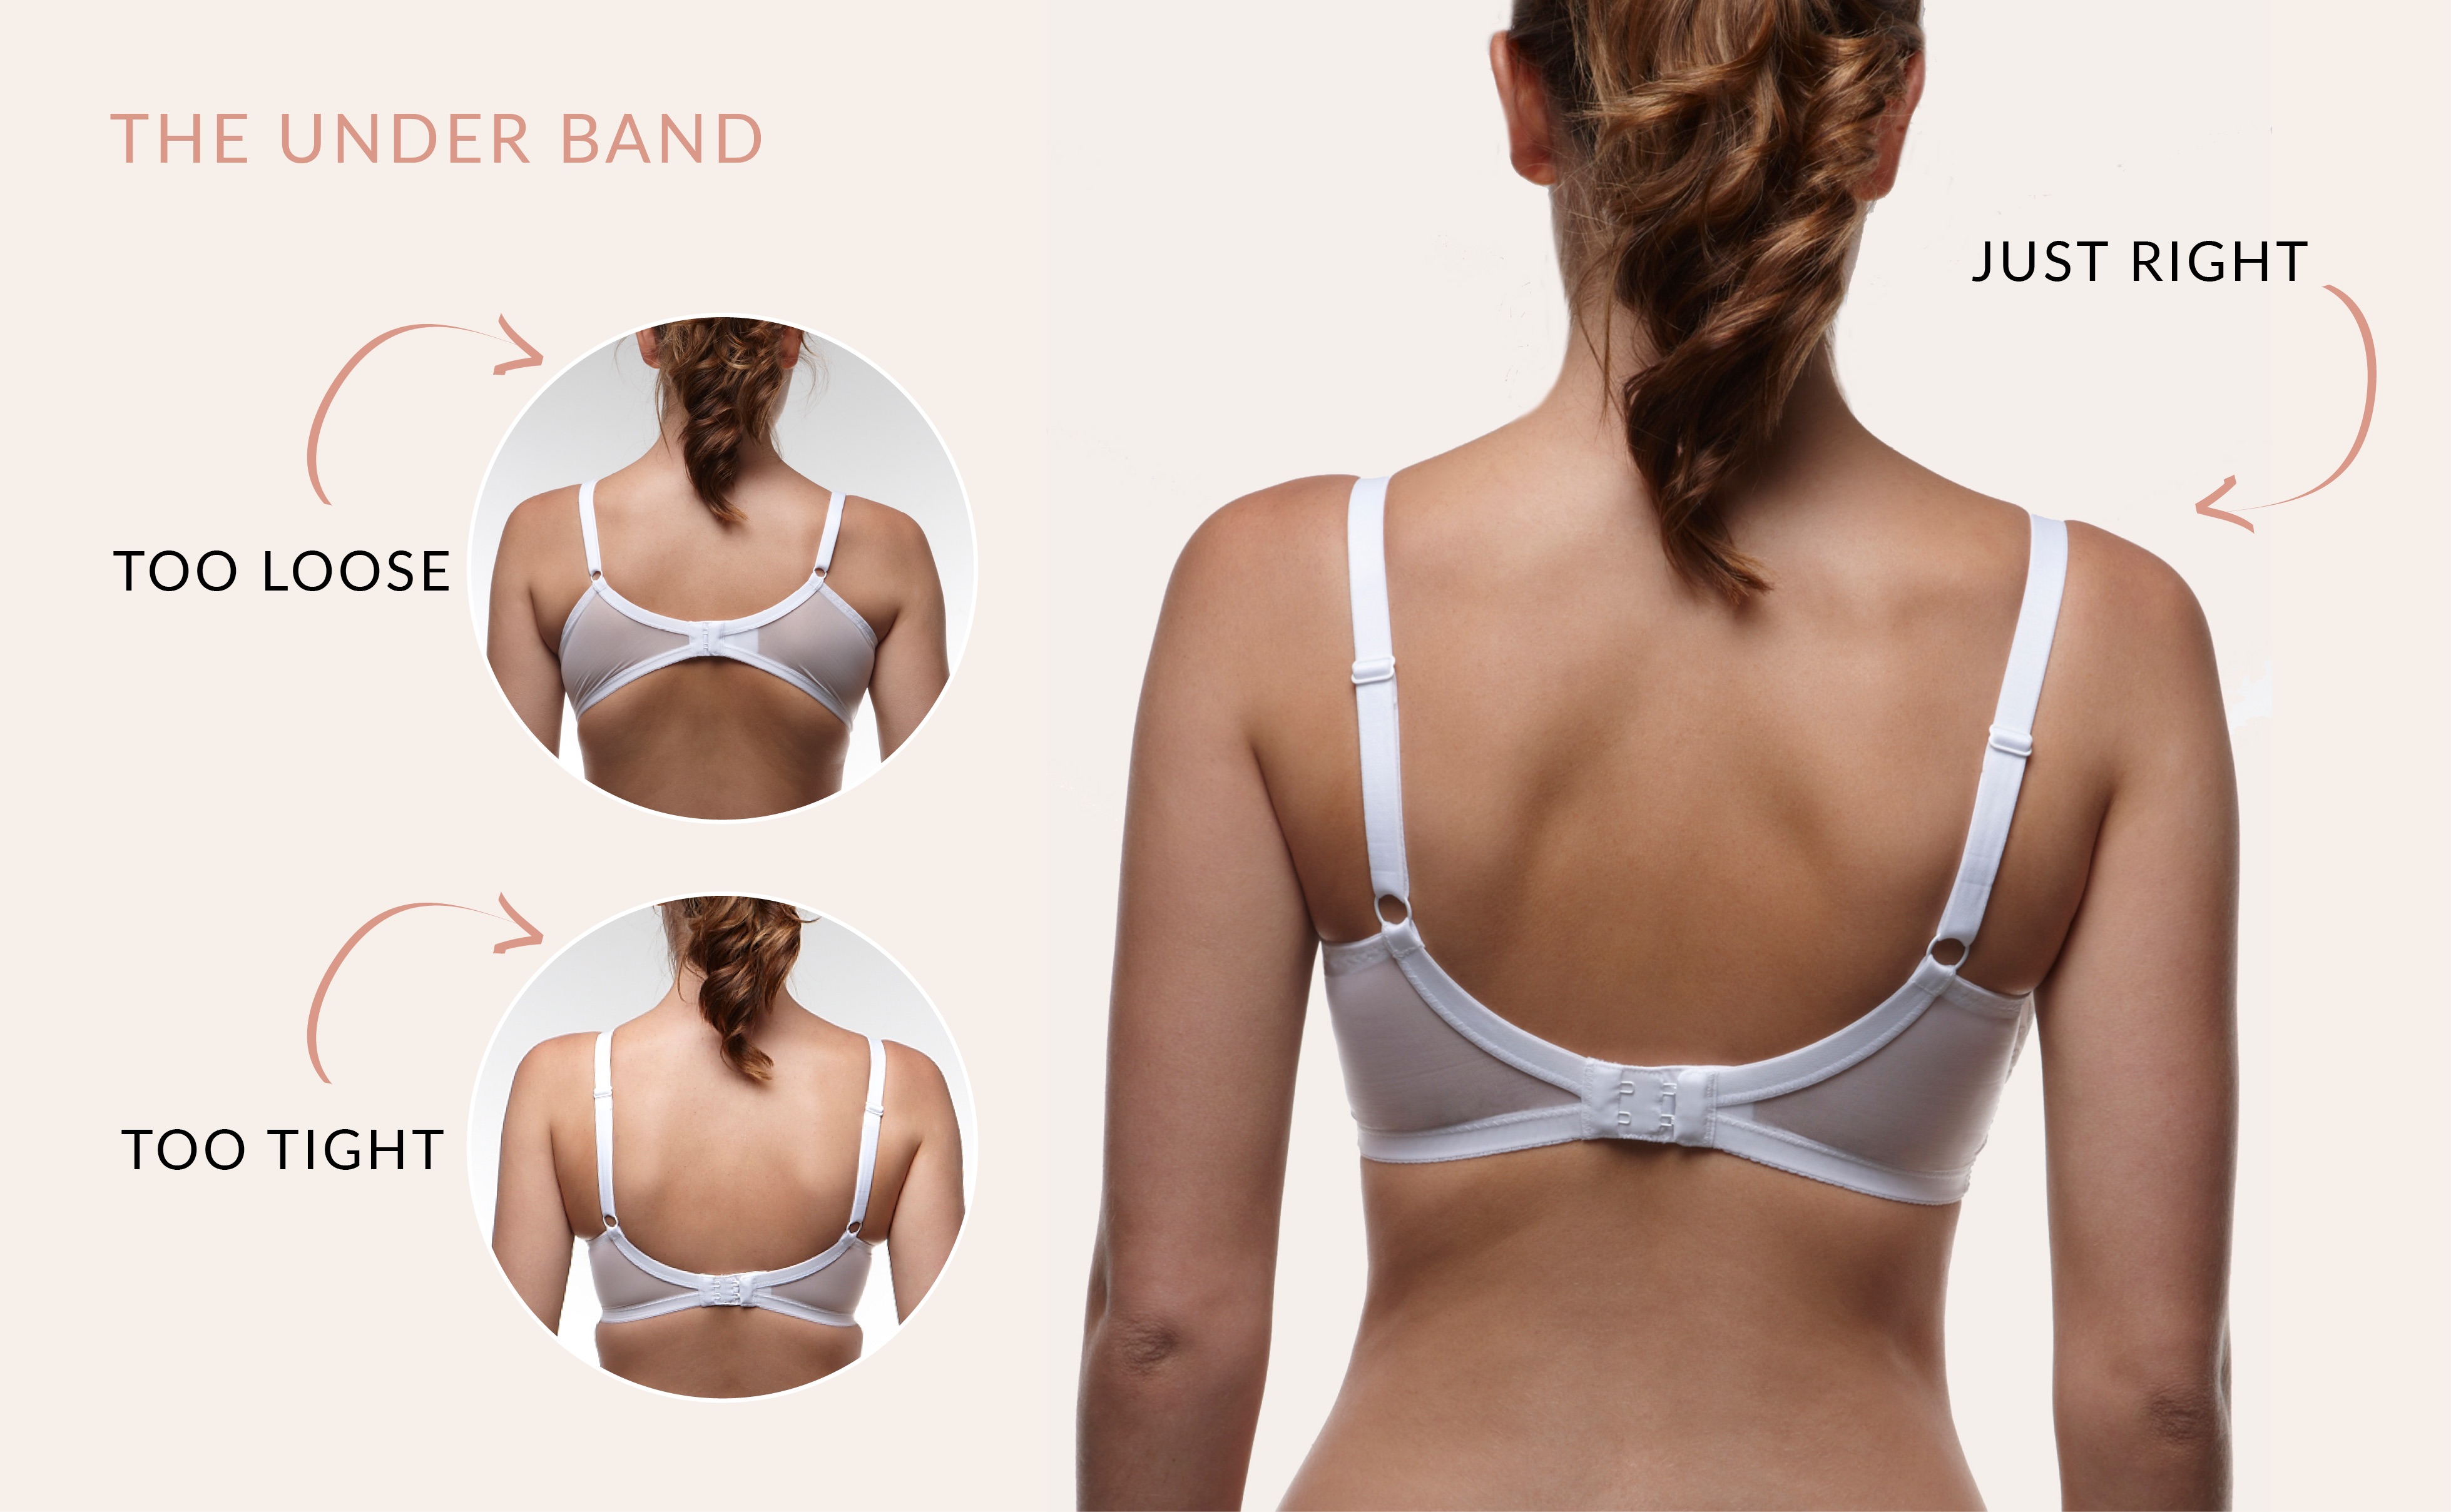 We Want The Right Fitting Bra! – FORLEST®